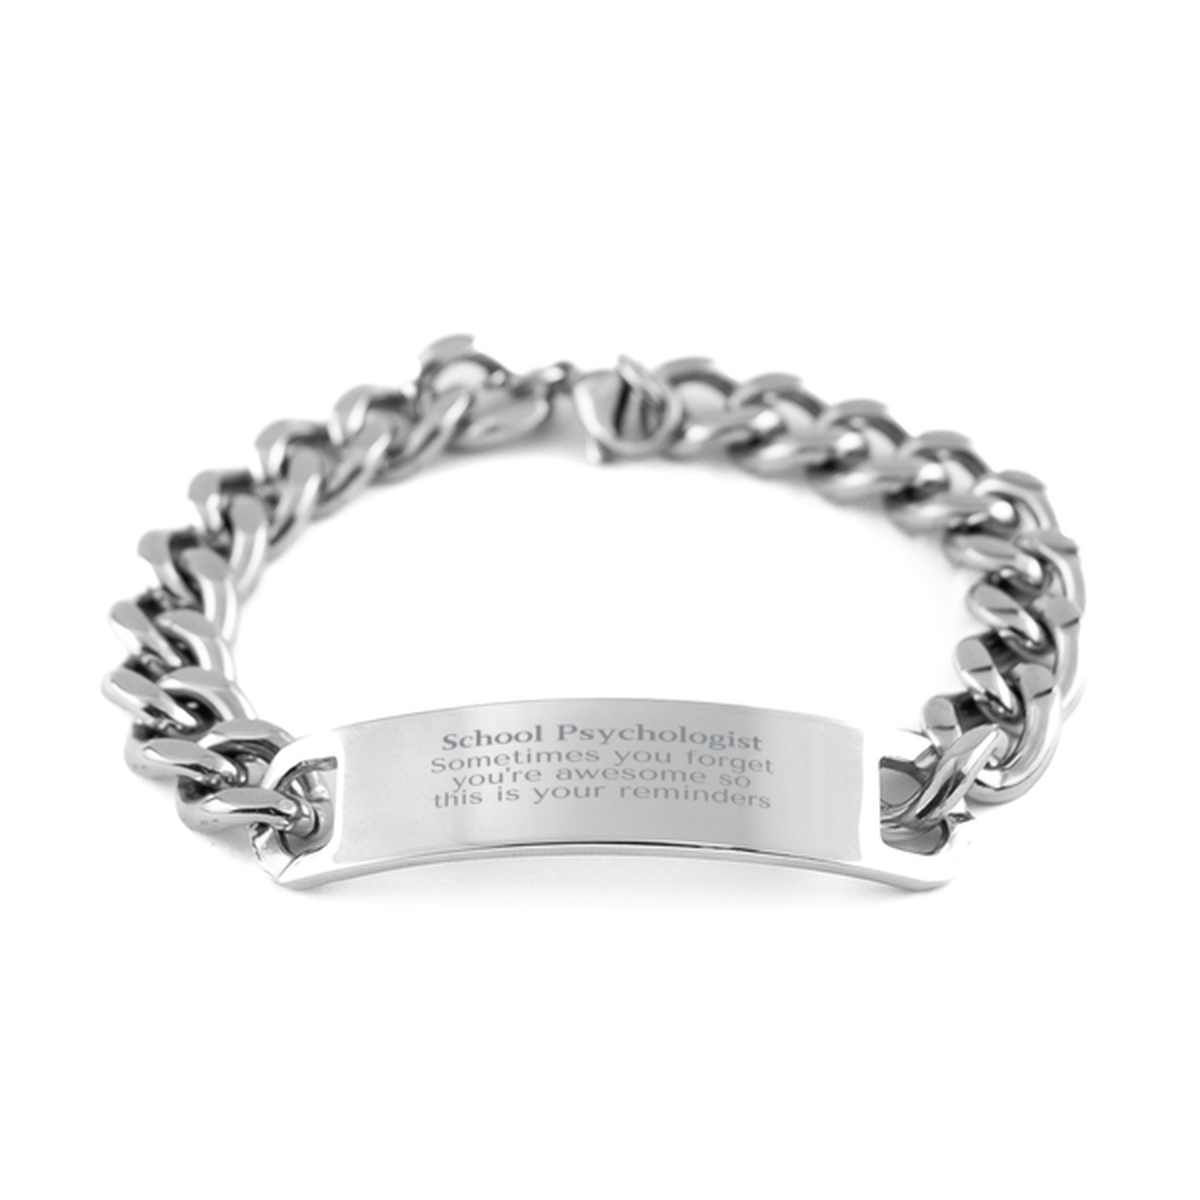 Sentimental School Psychologist Cuban Chain Stainless Steel Bracelet, School Psychologist Sometimes you forget you're awesome so this is your reminders, Graduation Christmas Birthday Gifts for School Psychologist, Men, Women, Coworkers